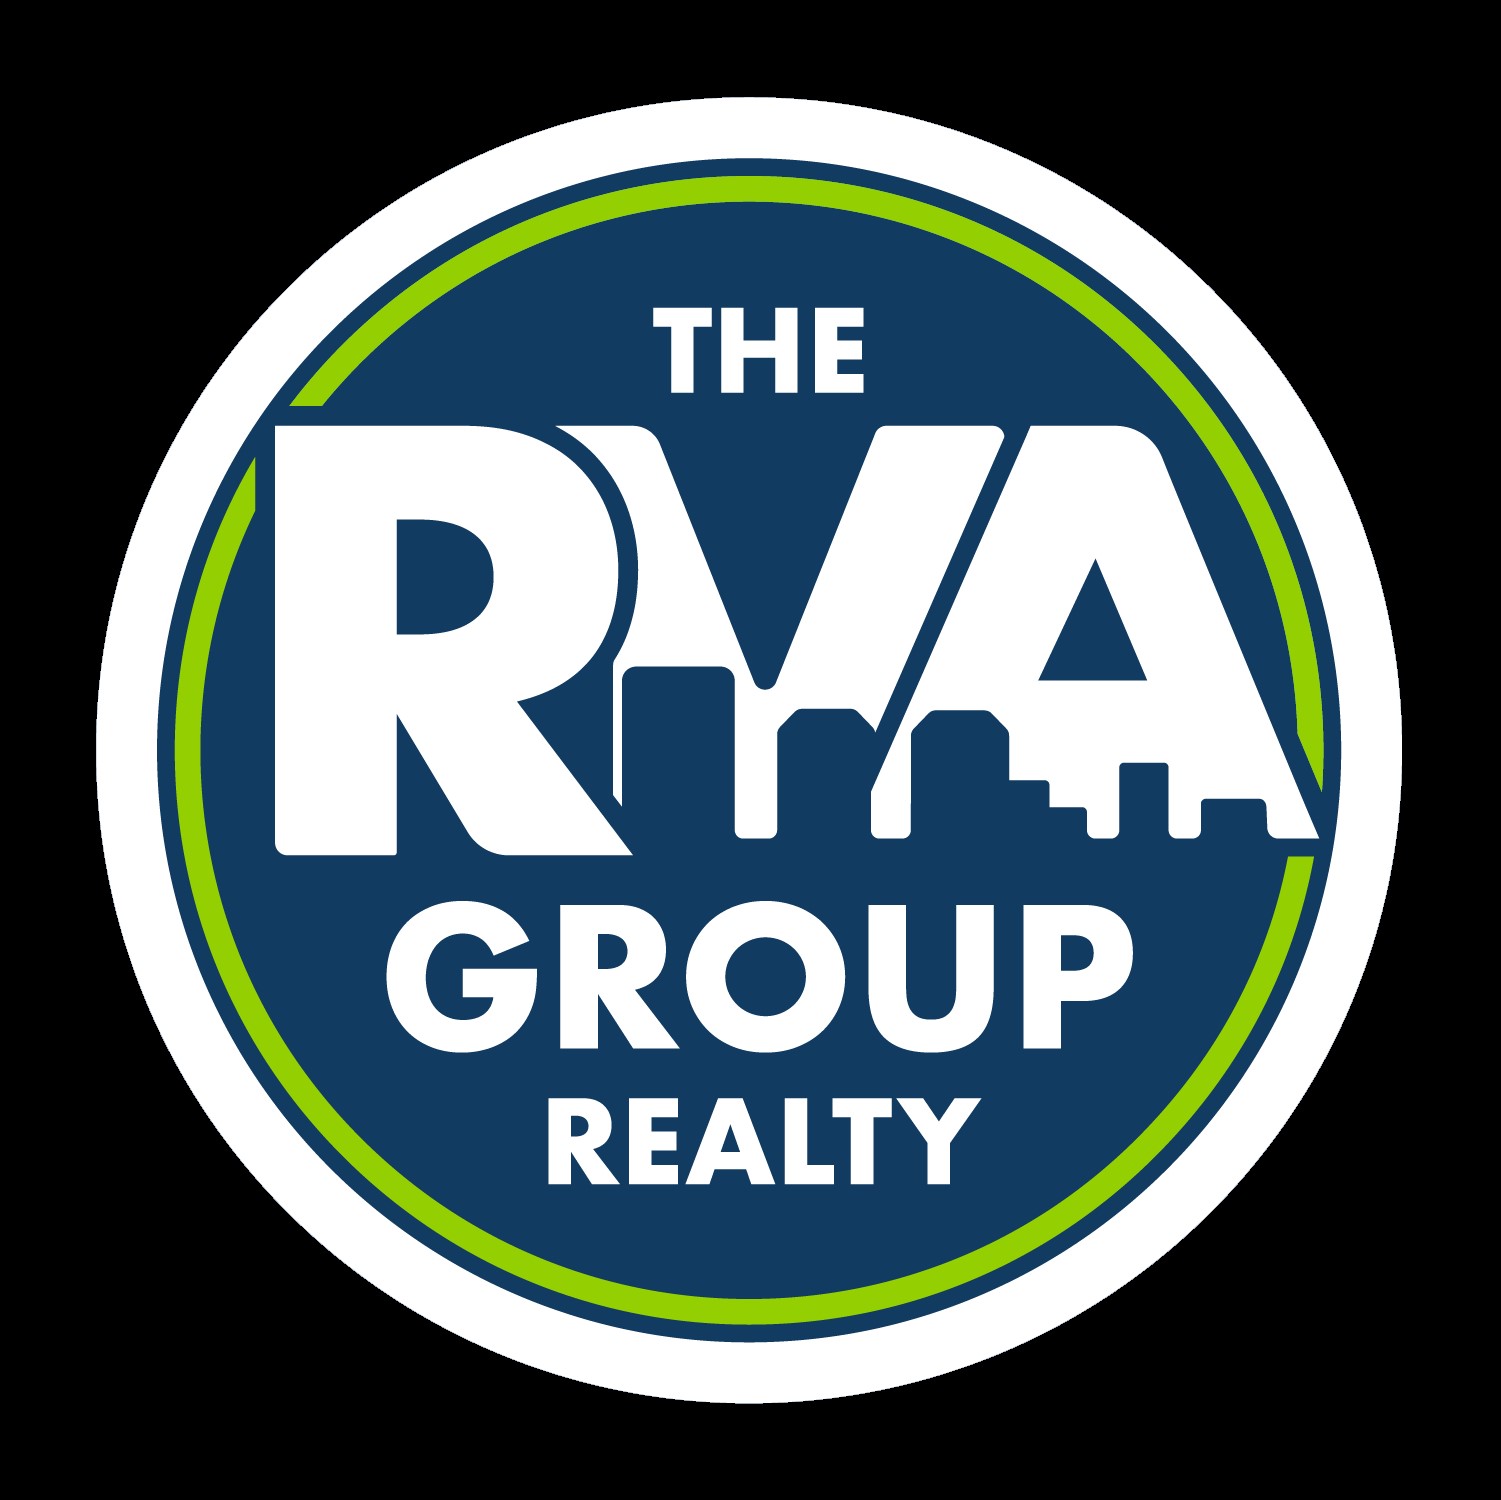 The RVA Group Realty